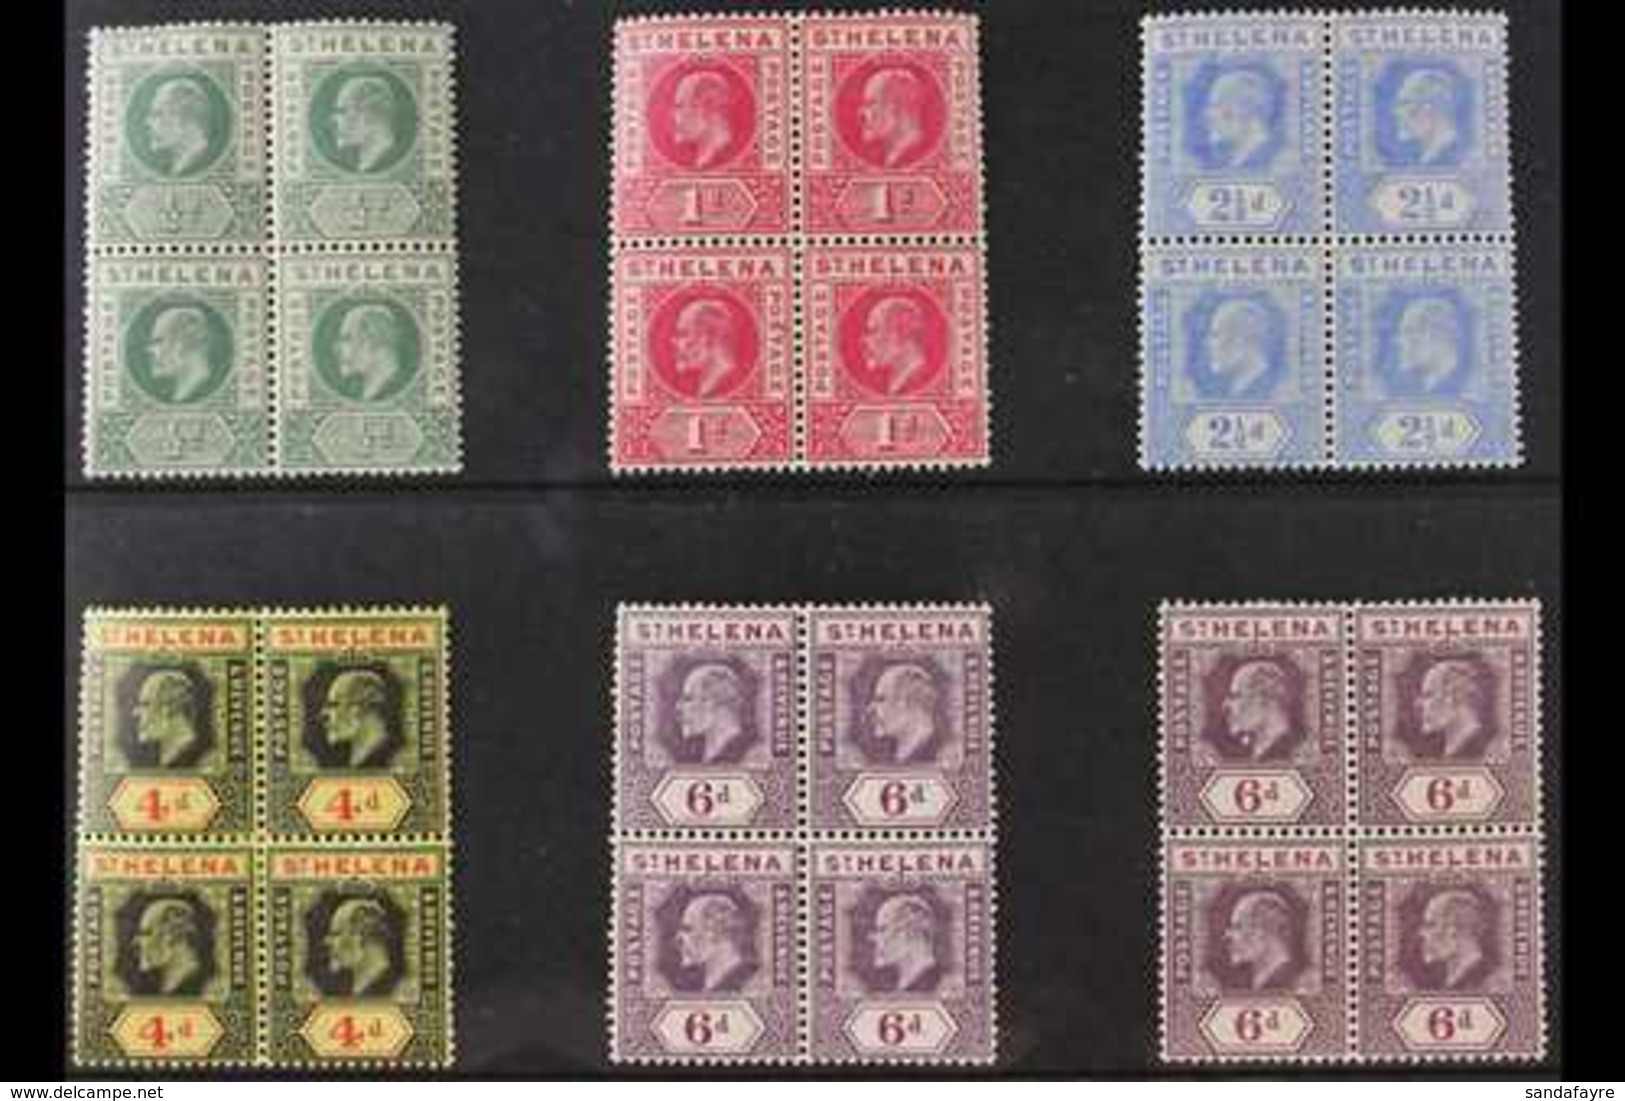 1902-11 BLOCKS OF 4.  A Delightful Group Presented On A Stock Card That Includes The 1902 Set With ½d Green & 1d Carmine - St. Helena